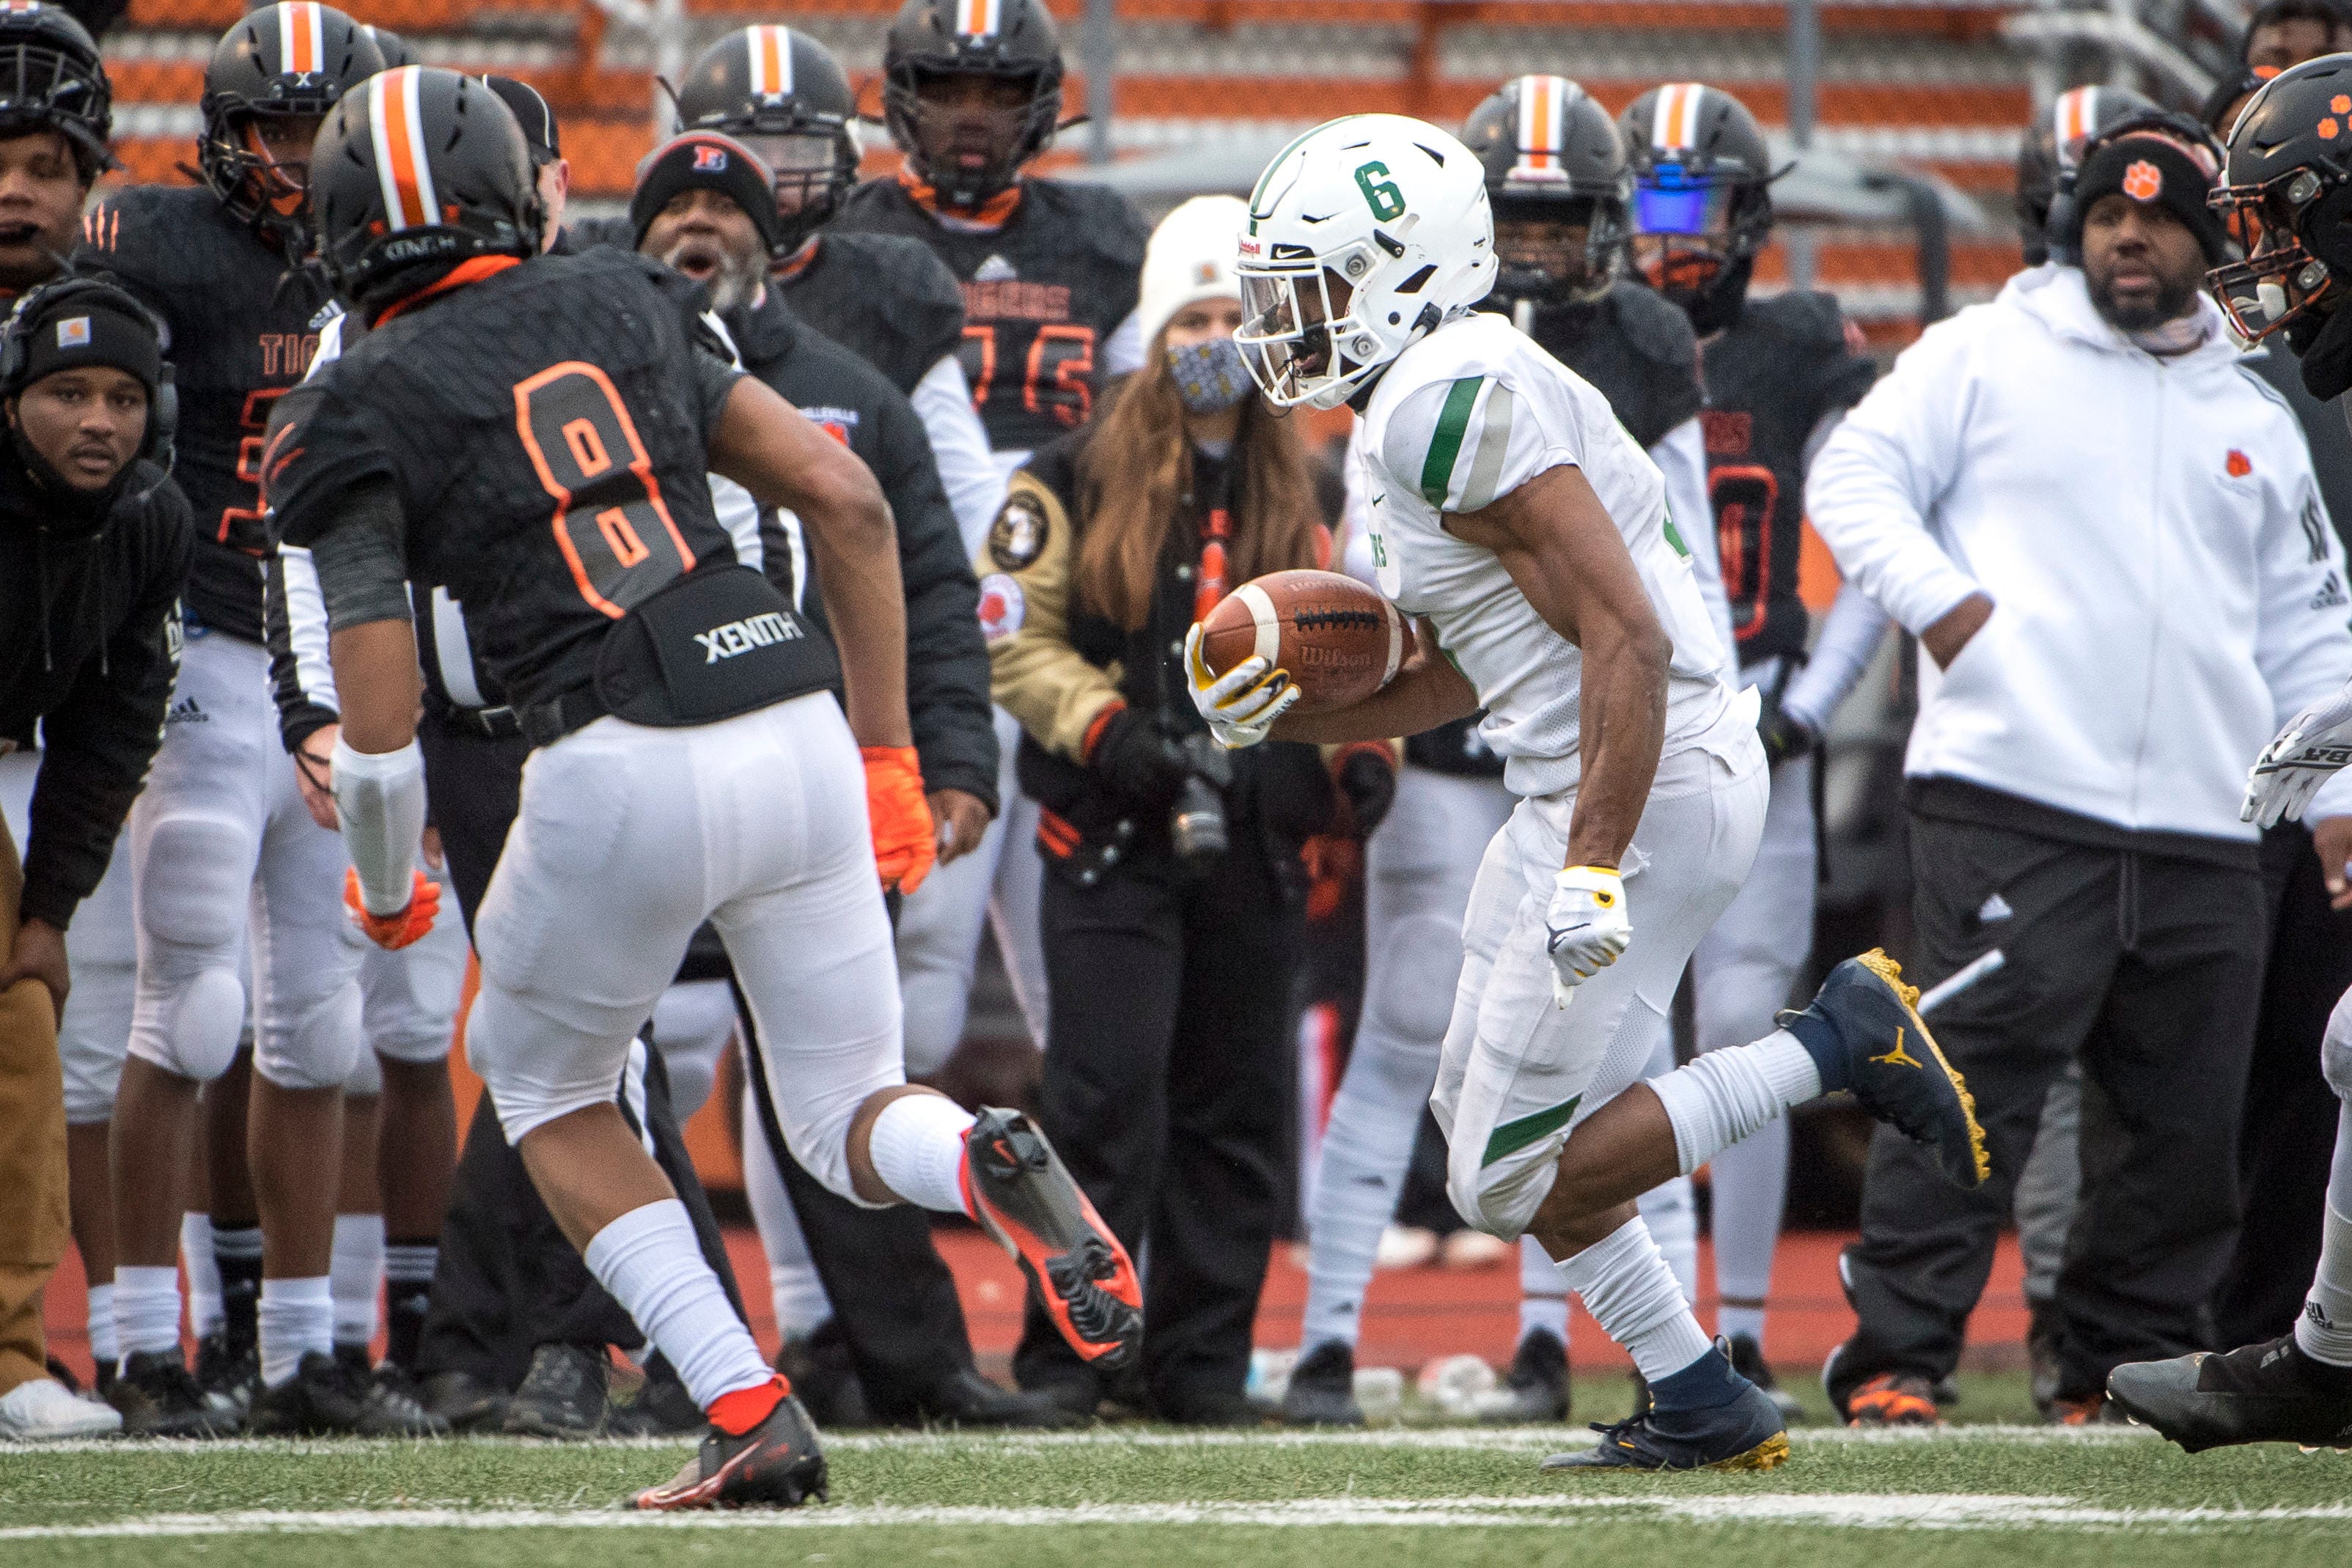 West Bloomfield senior Donovan Edwards (6) runs the ball during the fourth quarter.